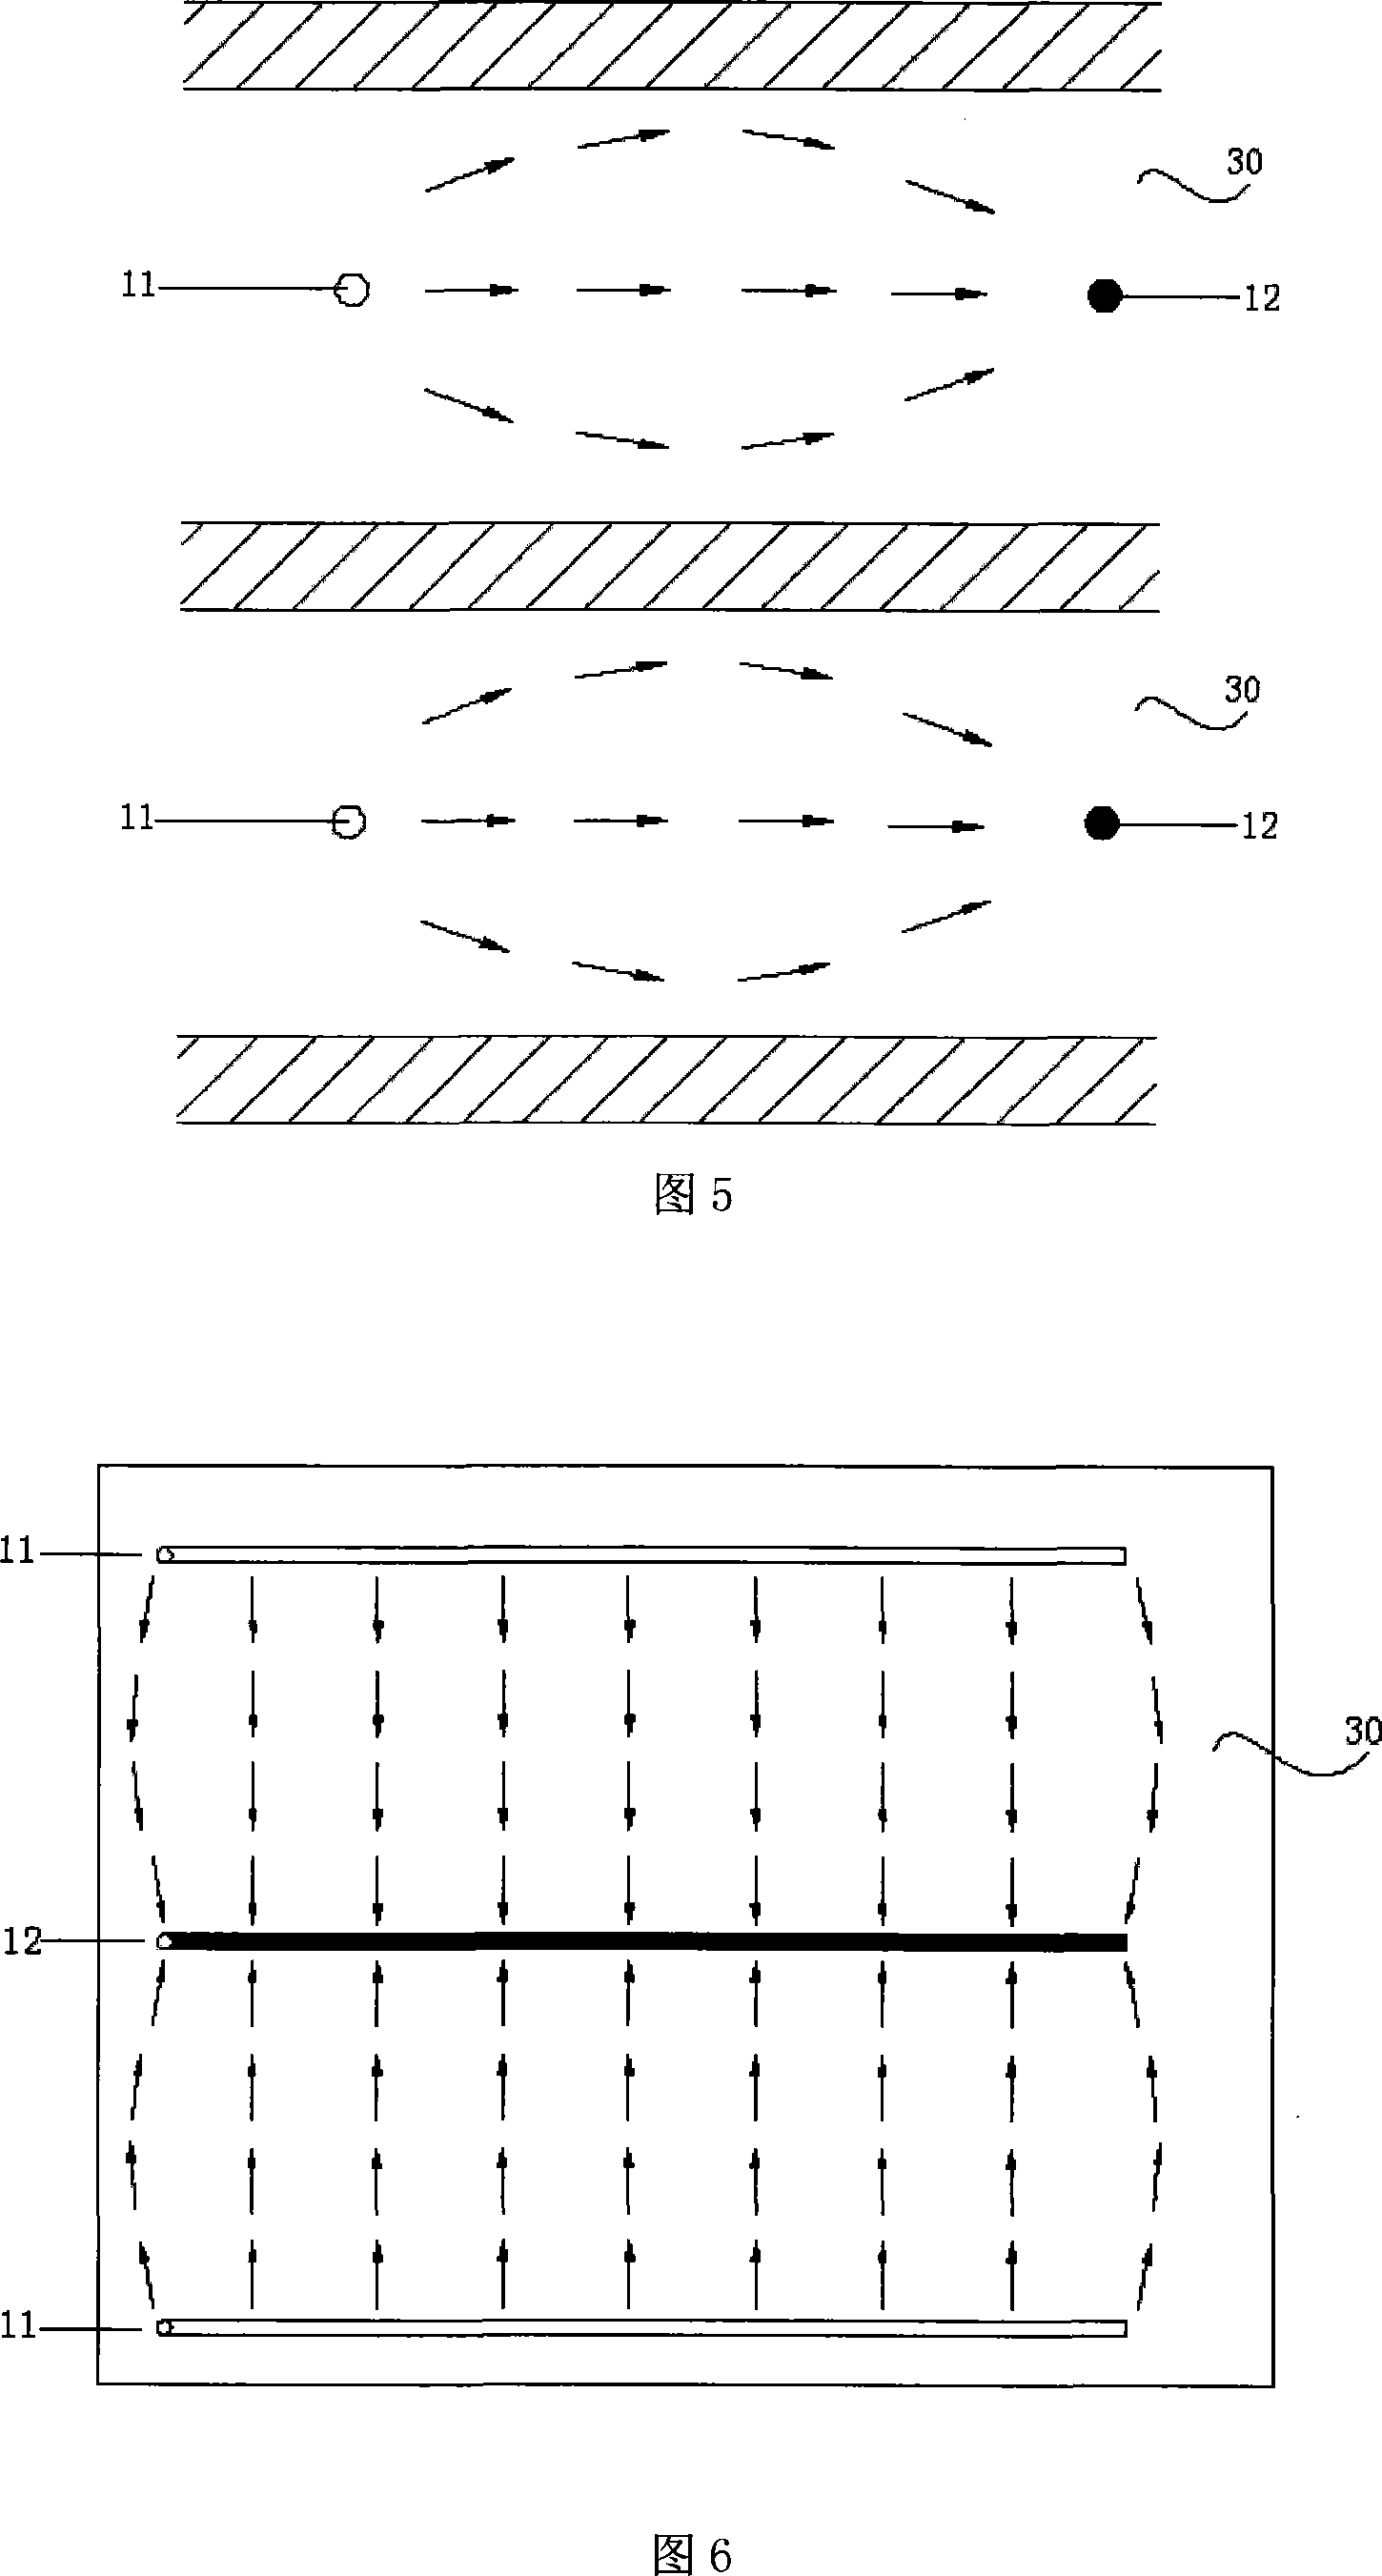 Method for horizontal well mixed gas displacing coal-bed gas